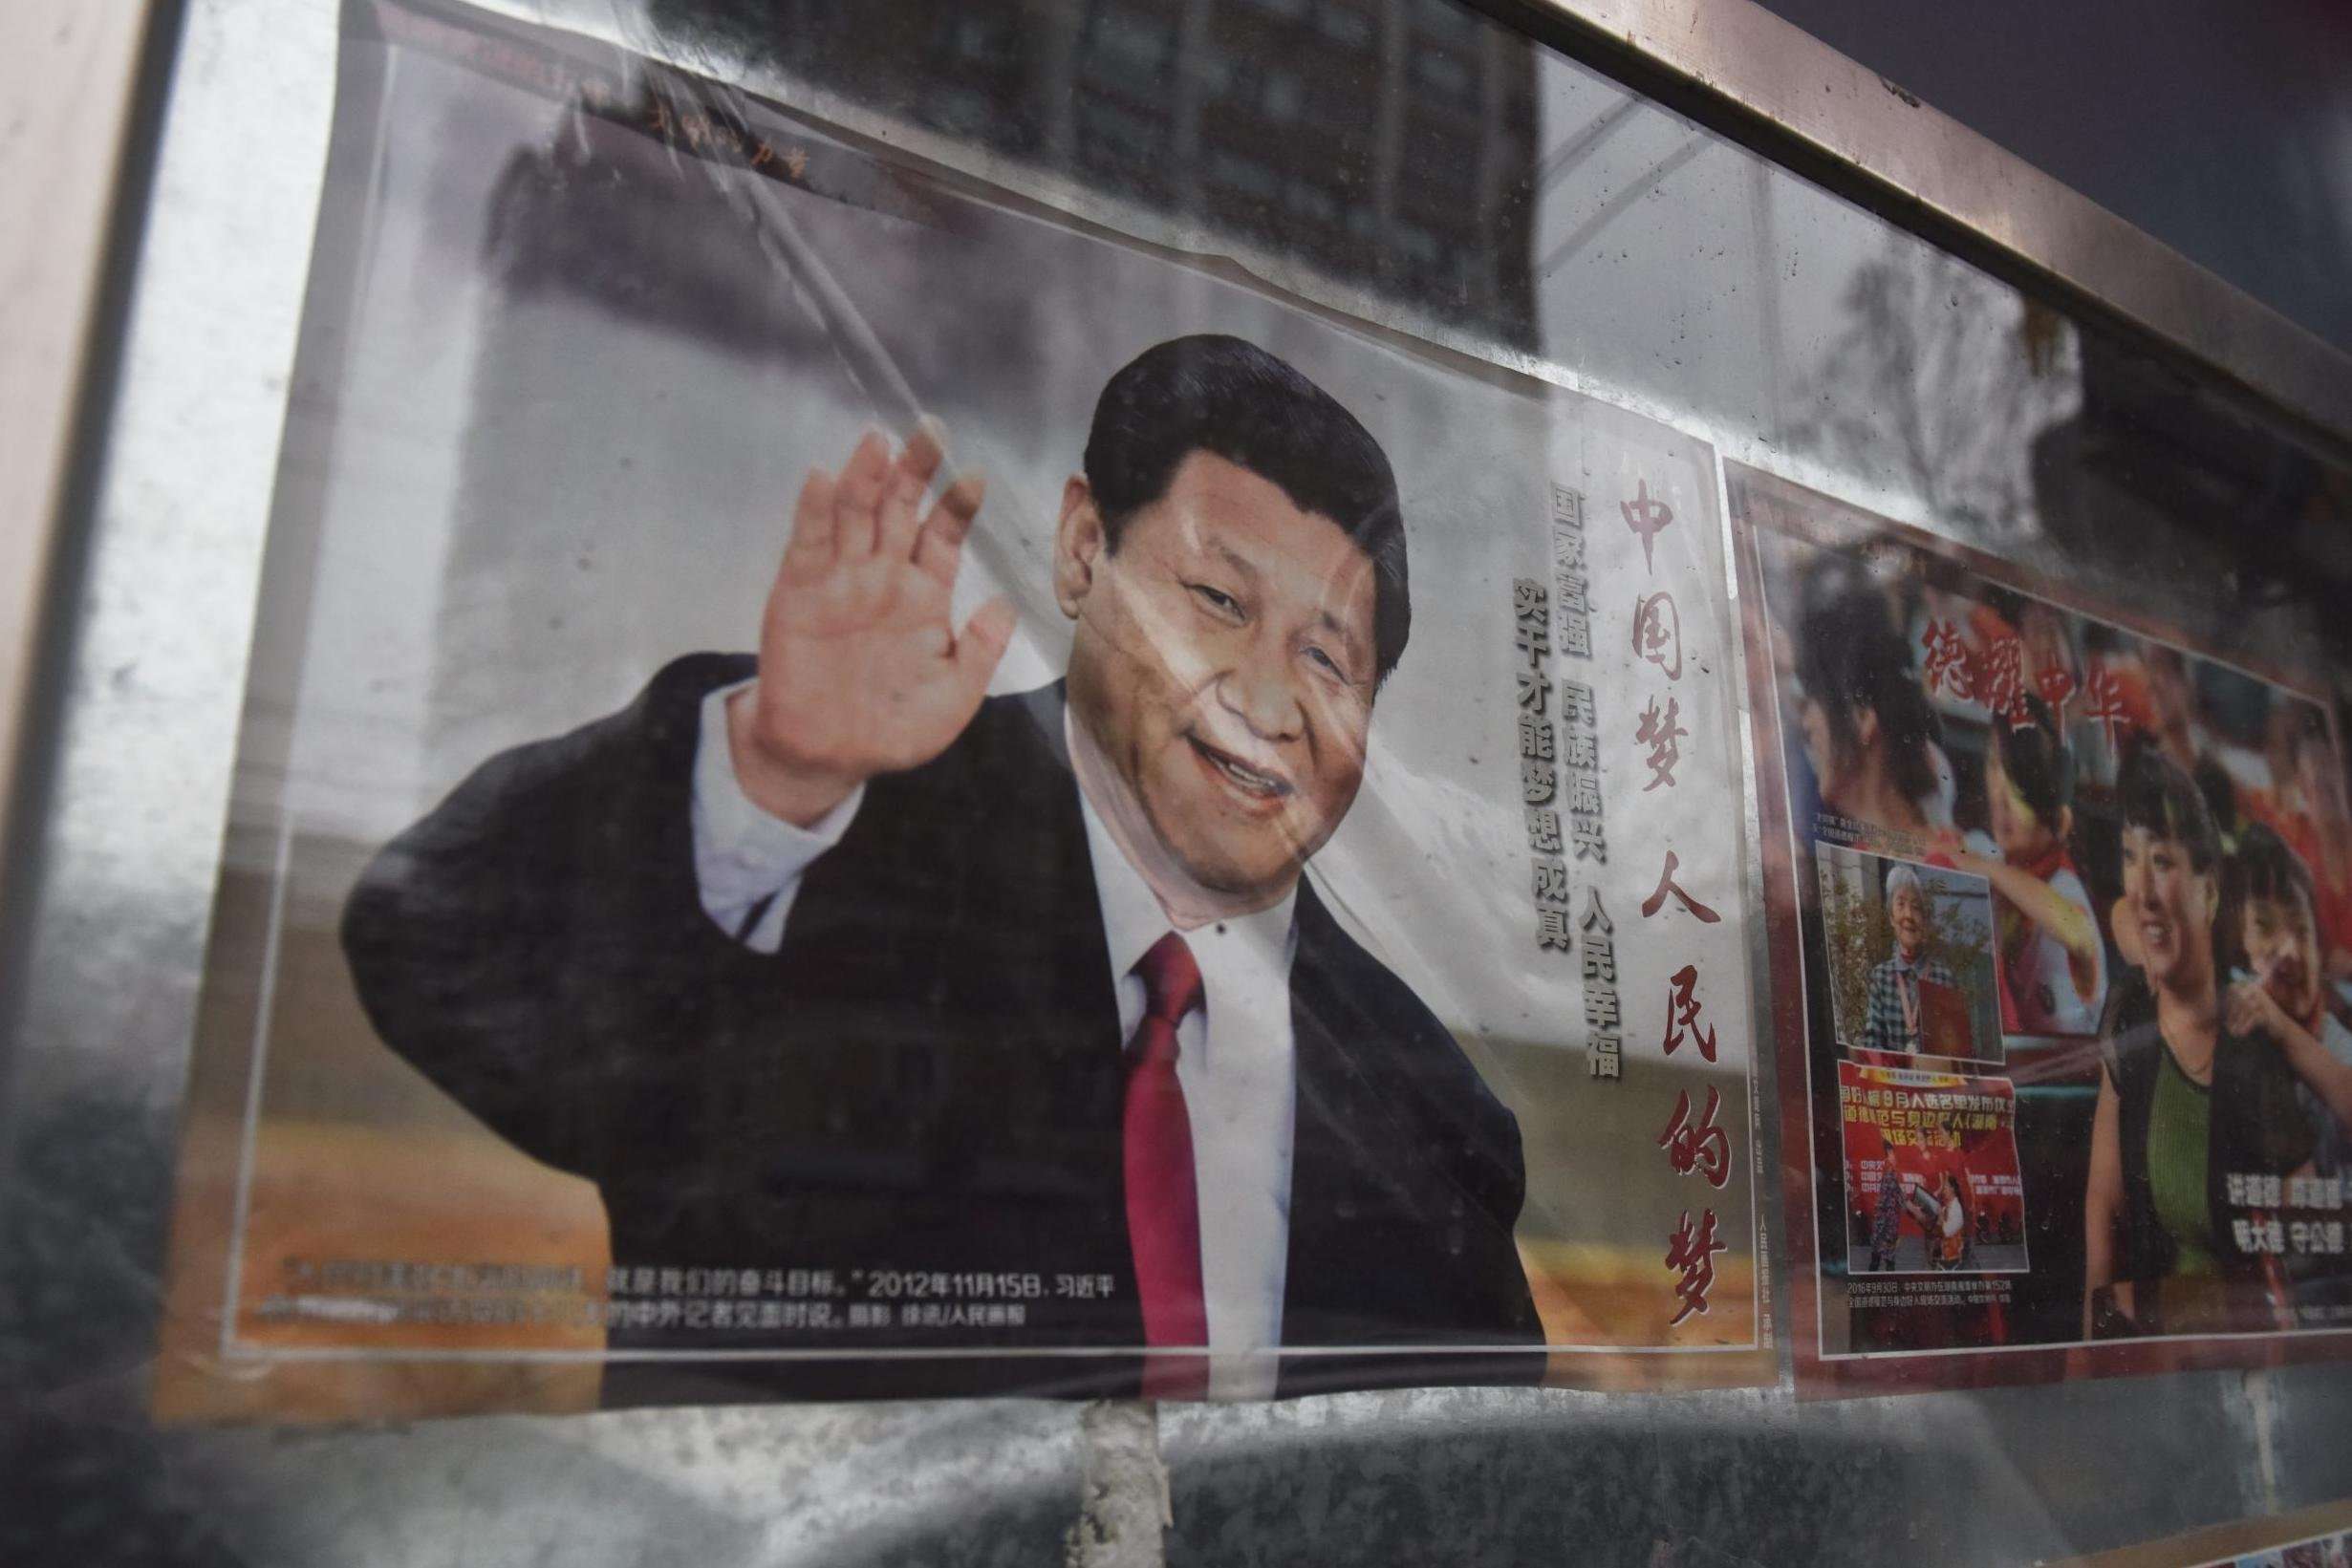 image for China bans the letter 'N' and George Orwell's Animal Farm as President Xi JinPing extends grip on power